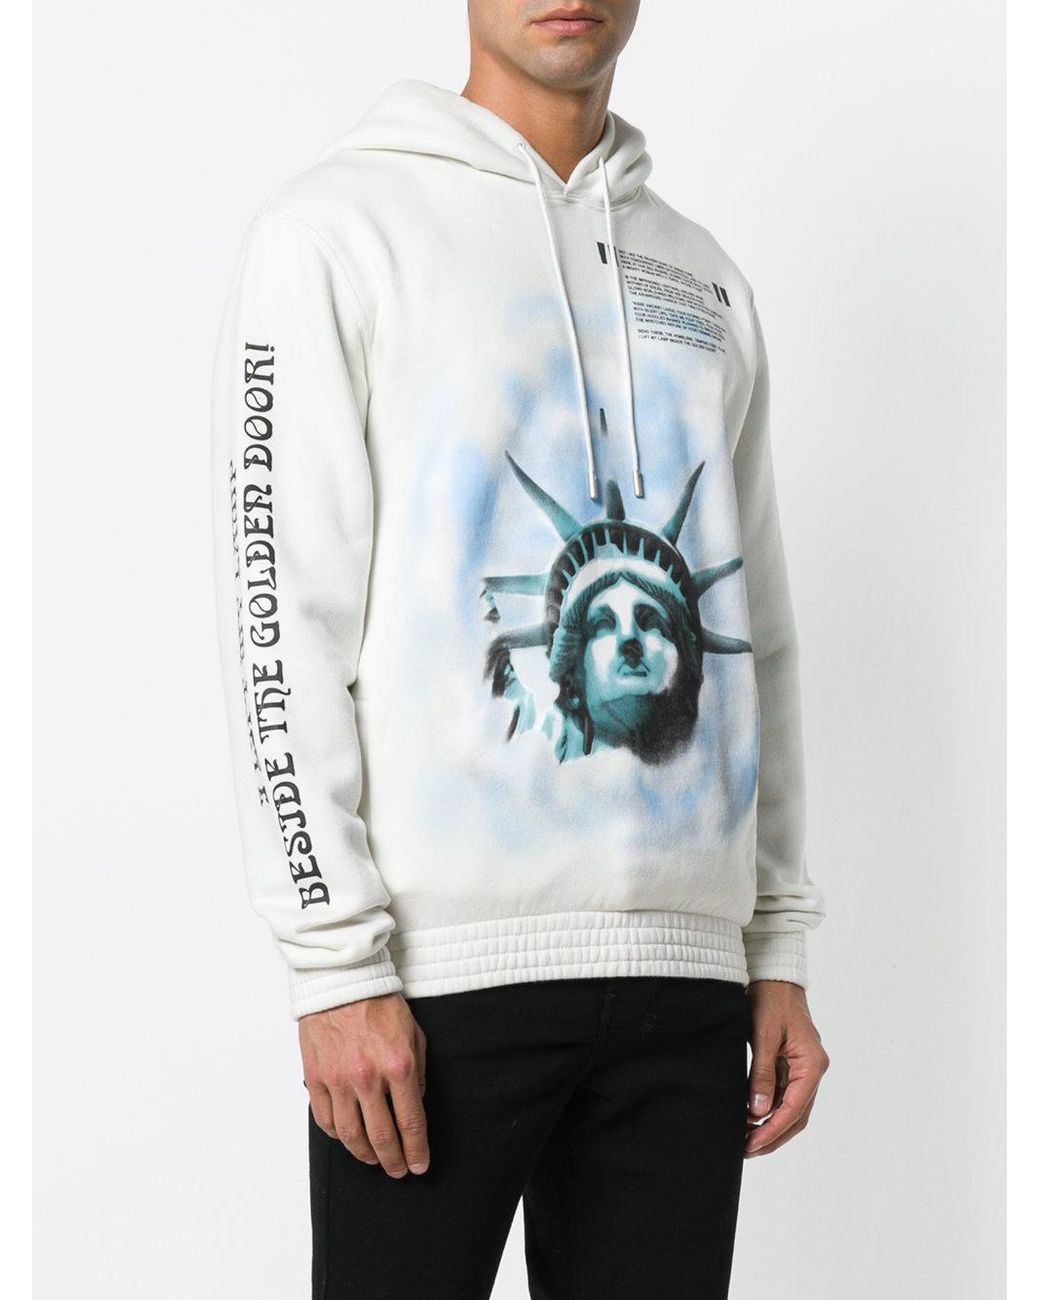 Off-White c/o Virgil Abloh Statue Of Liberty Hoodie in Blue for Men